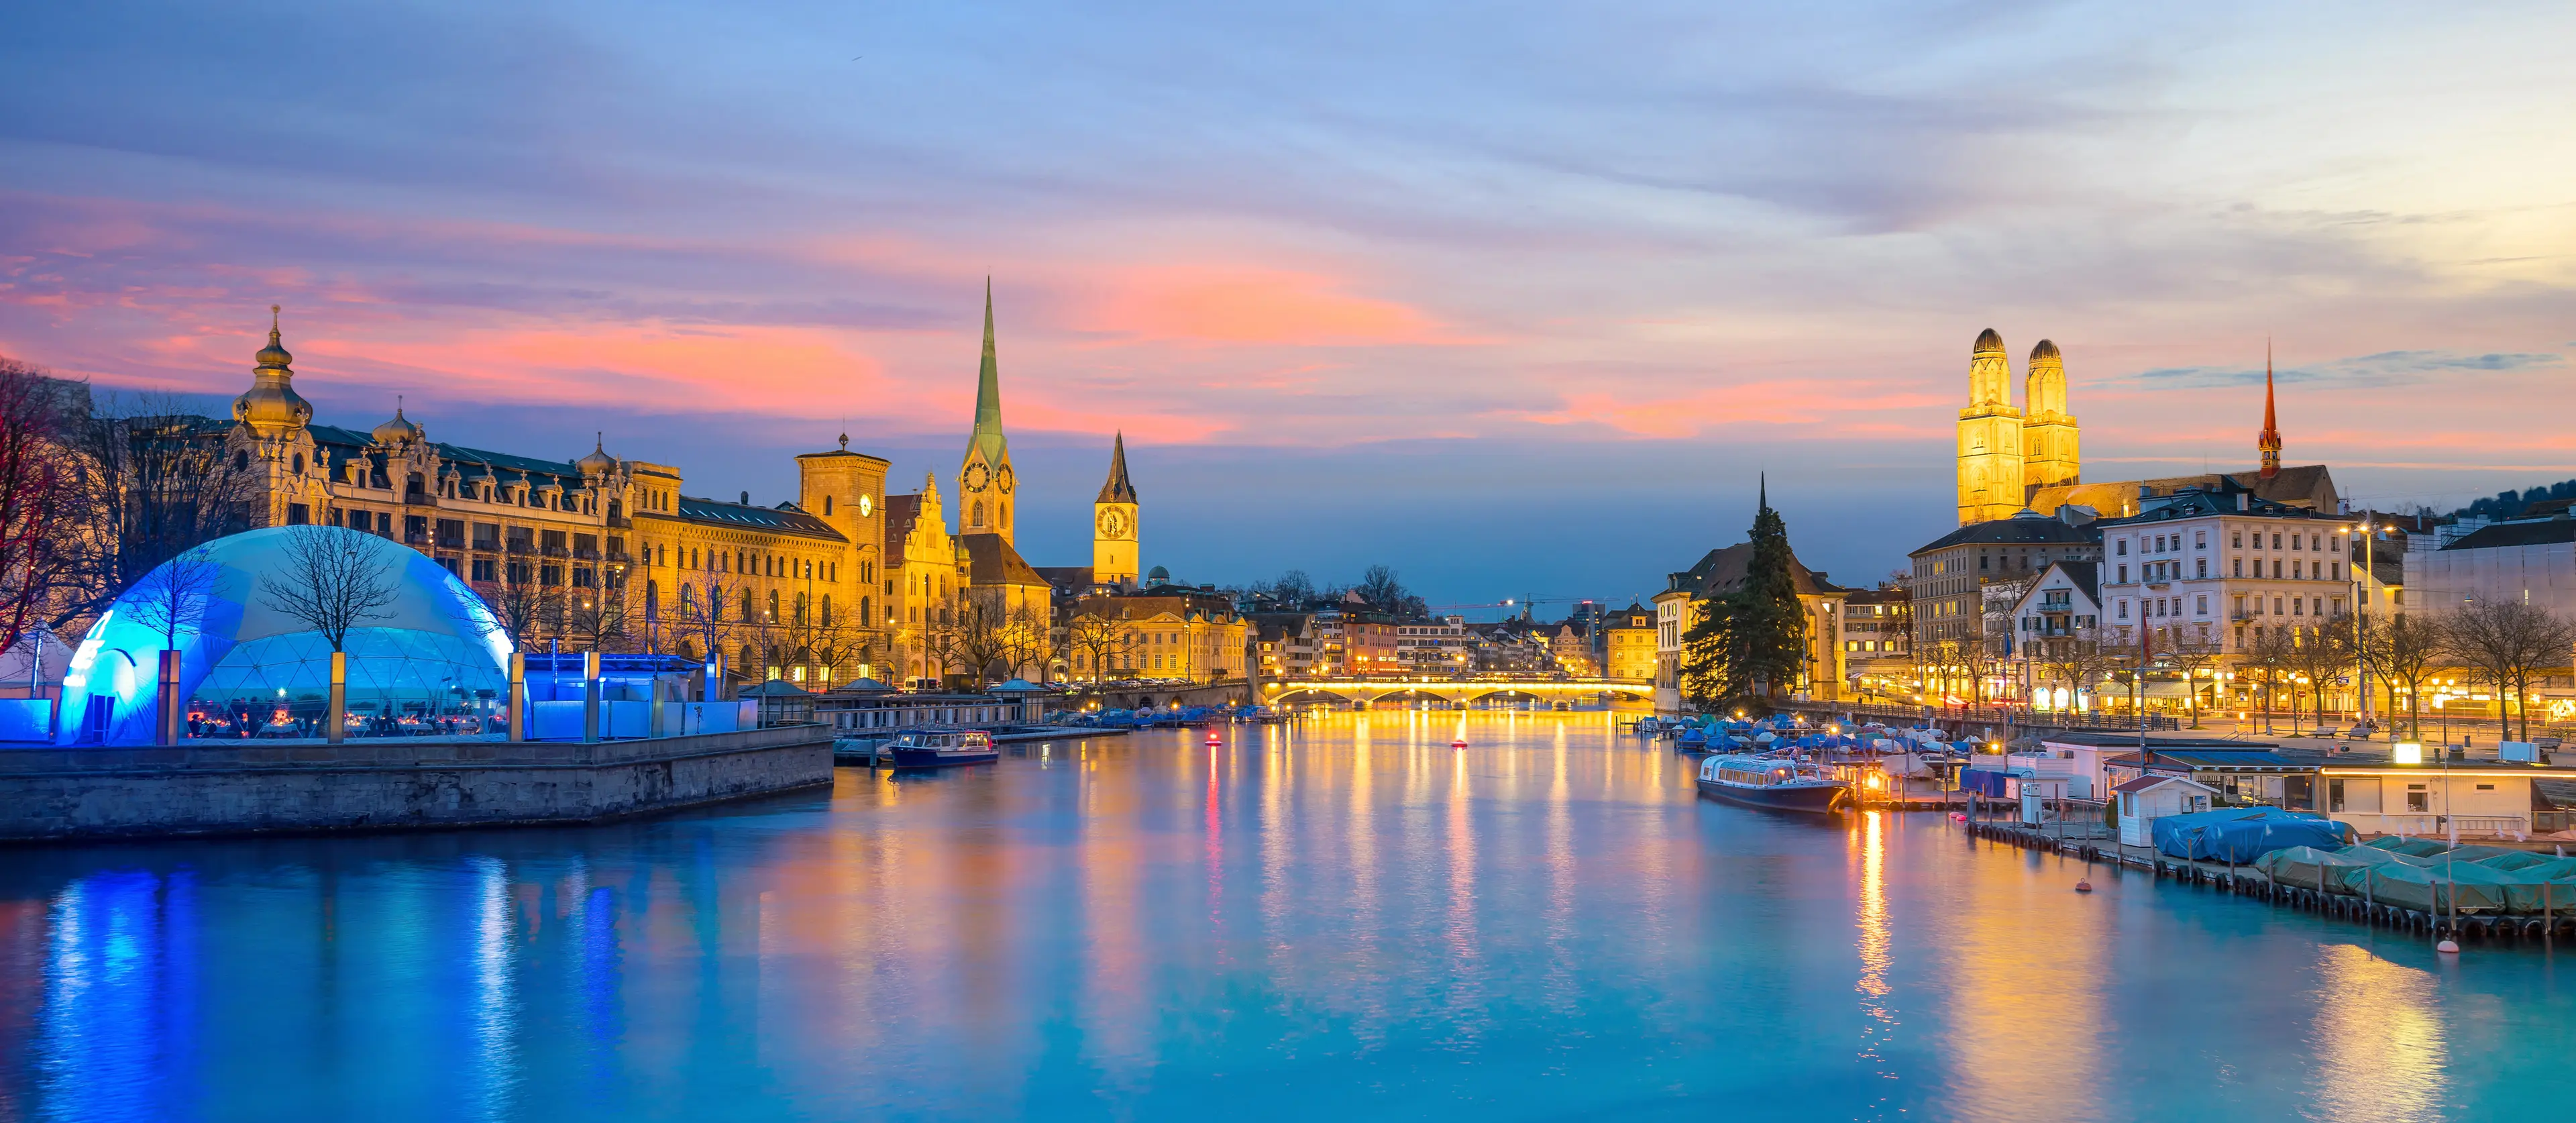 1-Day Zurich Trip: Offbeat Experiences and Culinary Delights with Friends